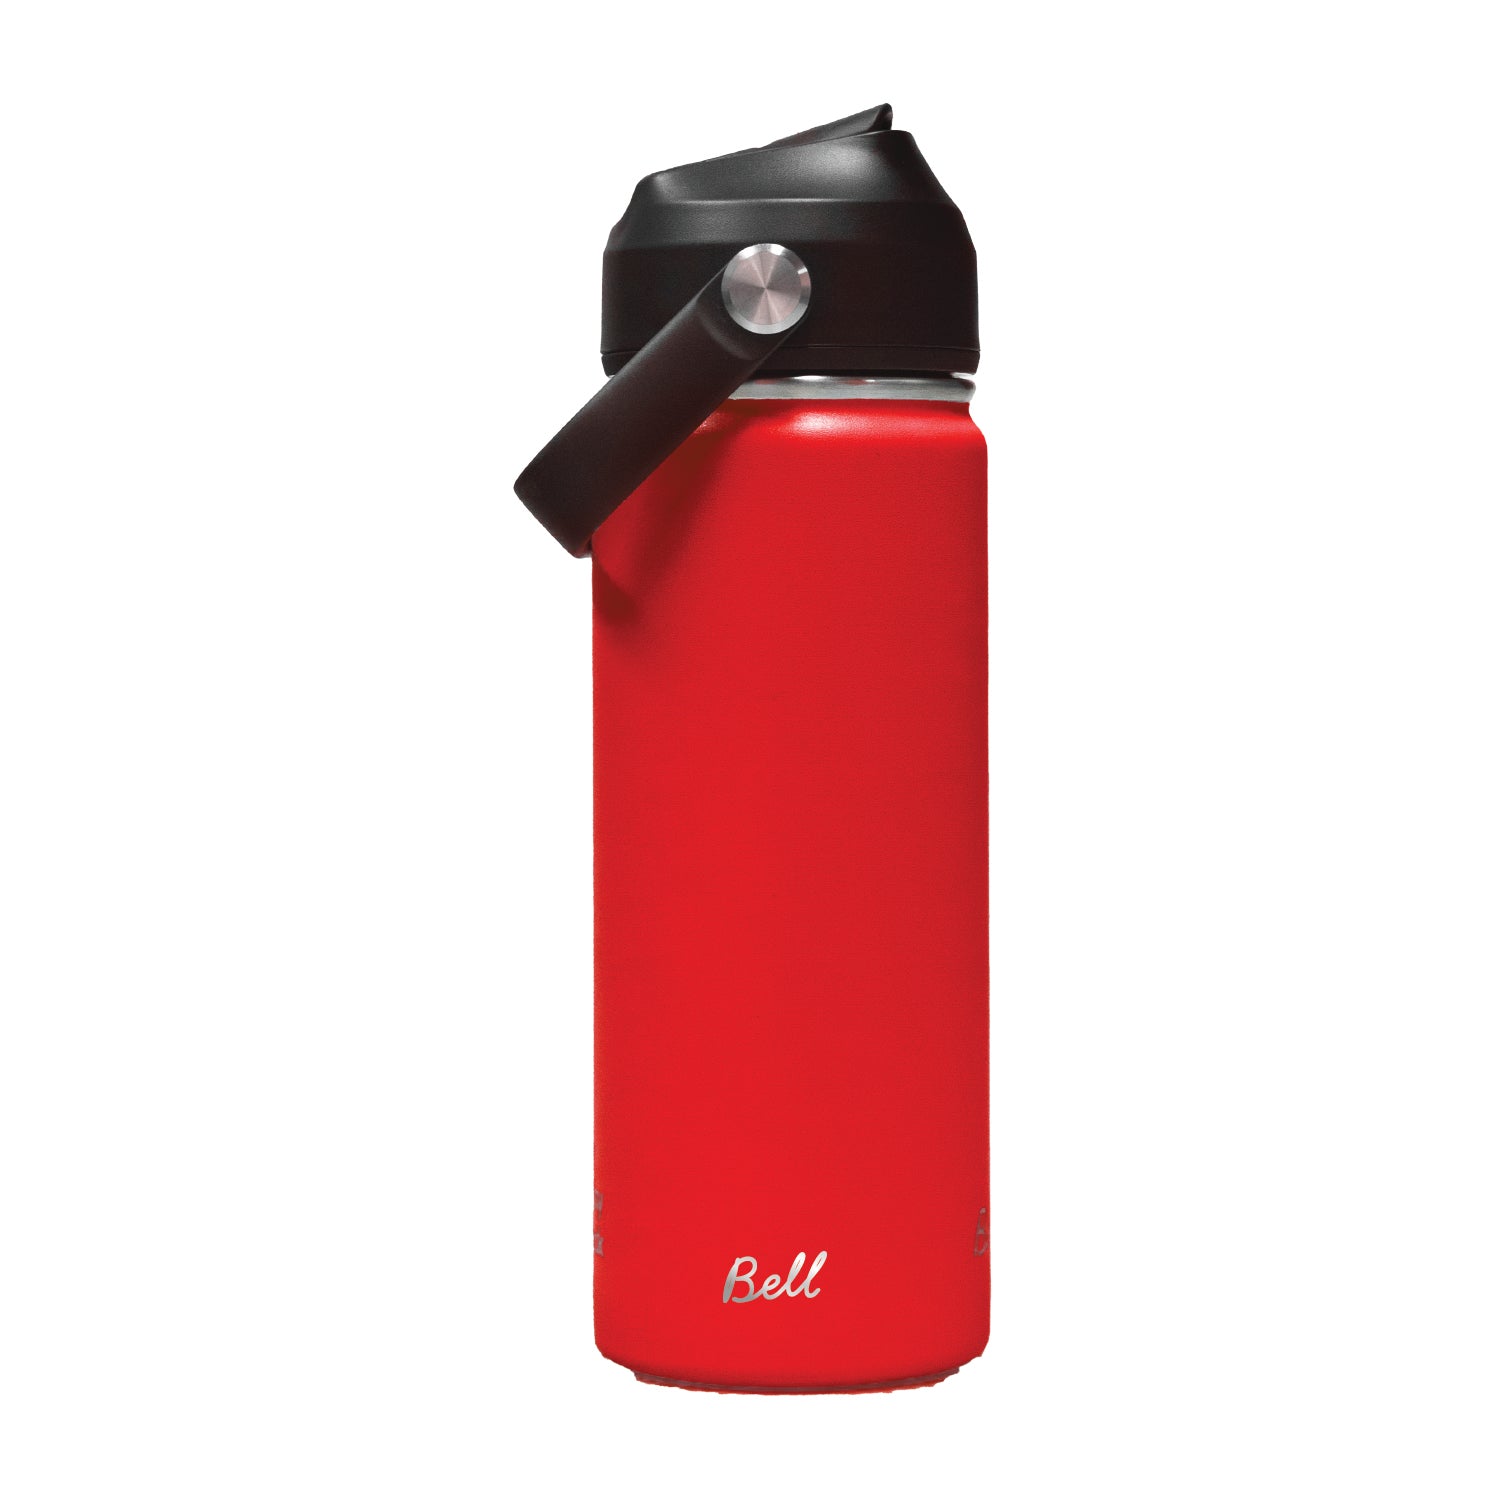 Bell Stainless Steel - Carry Handle - 500ml (18oz)